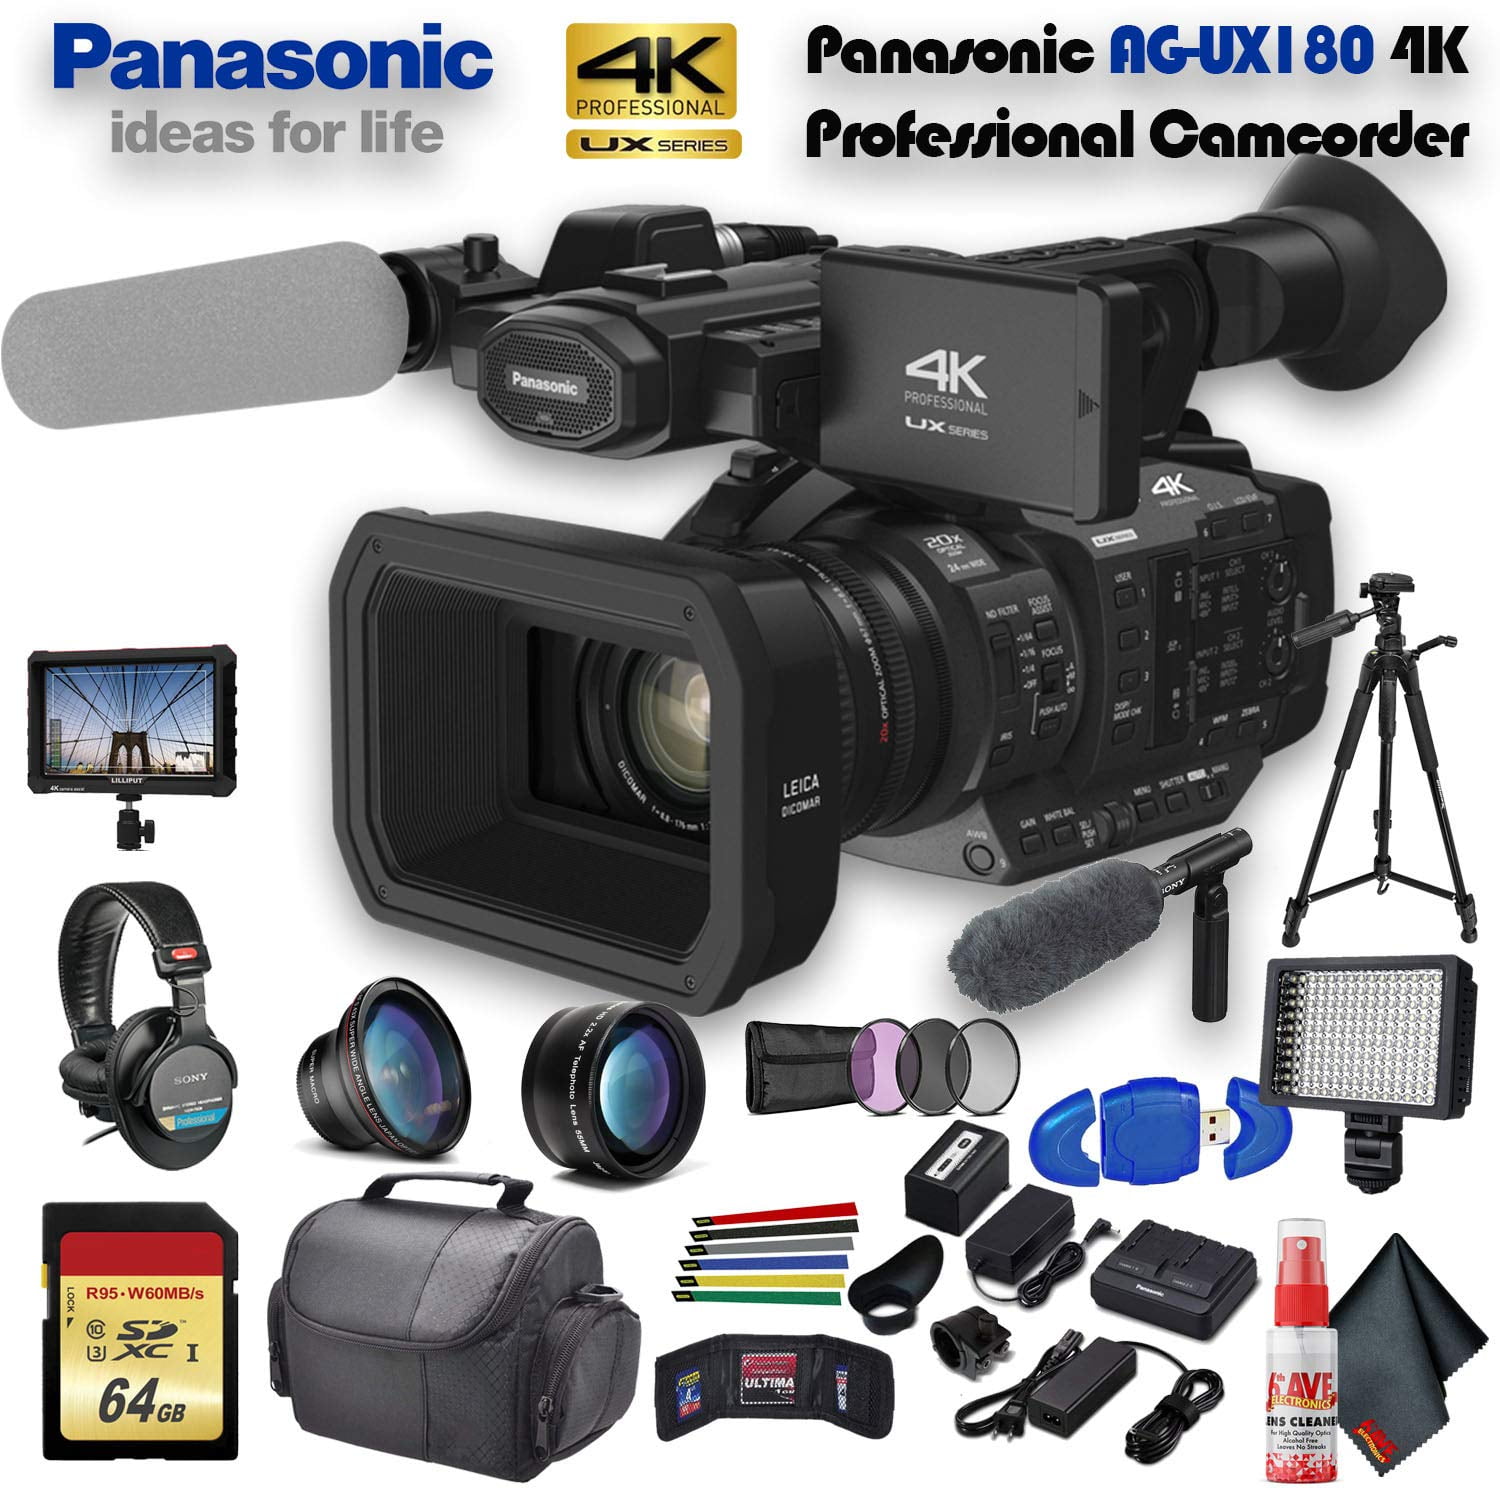 More Panasonic AG-UX180 4K Premium Professional Camcorder Bundle with Sony 128GB SDXC Memory Card UV Filter 